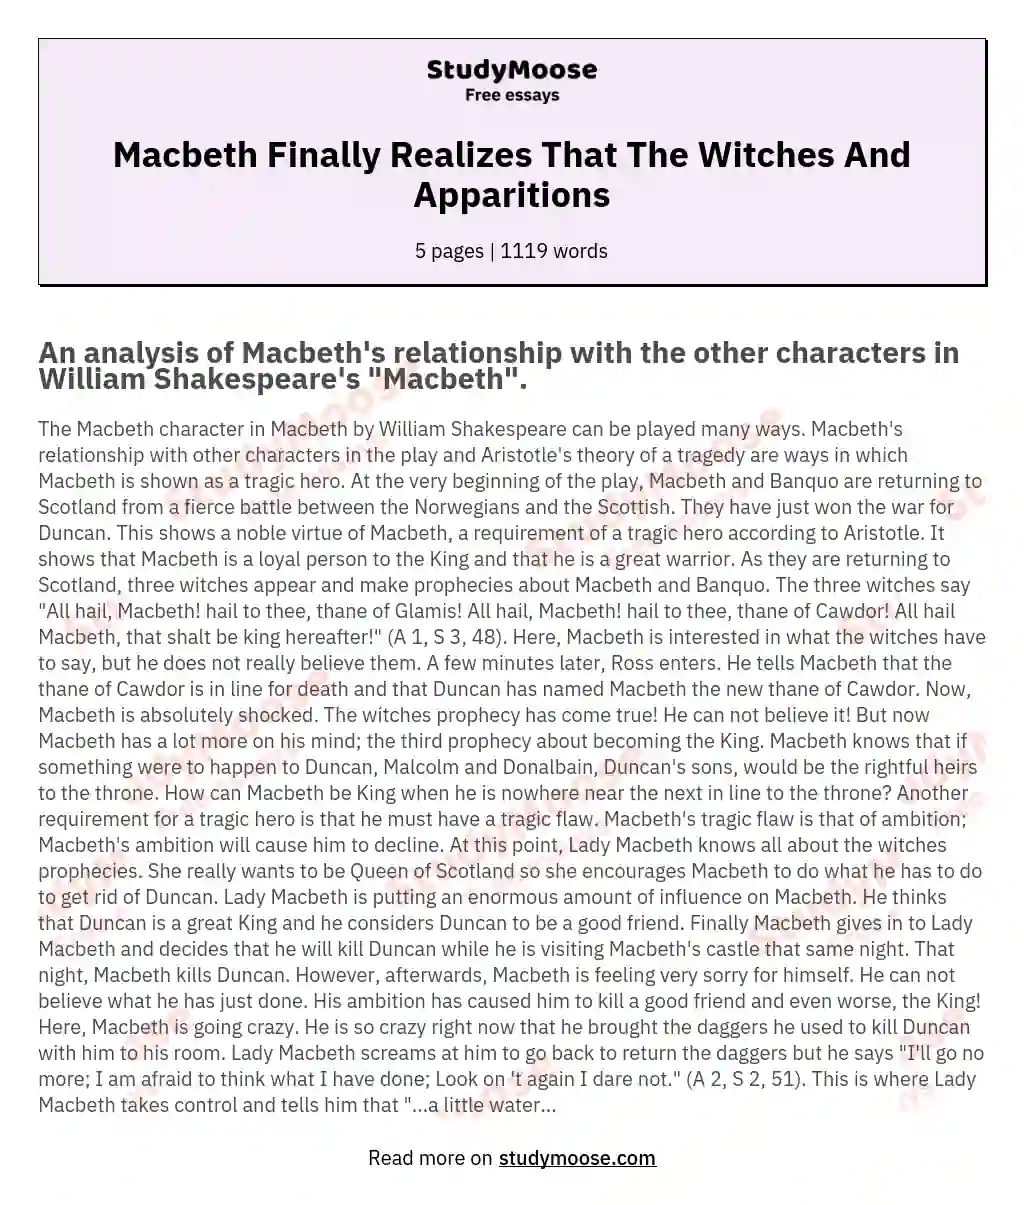 Macbeth Finally Realizes That The Witches And Apparitions